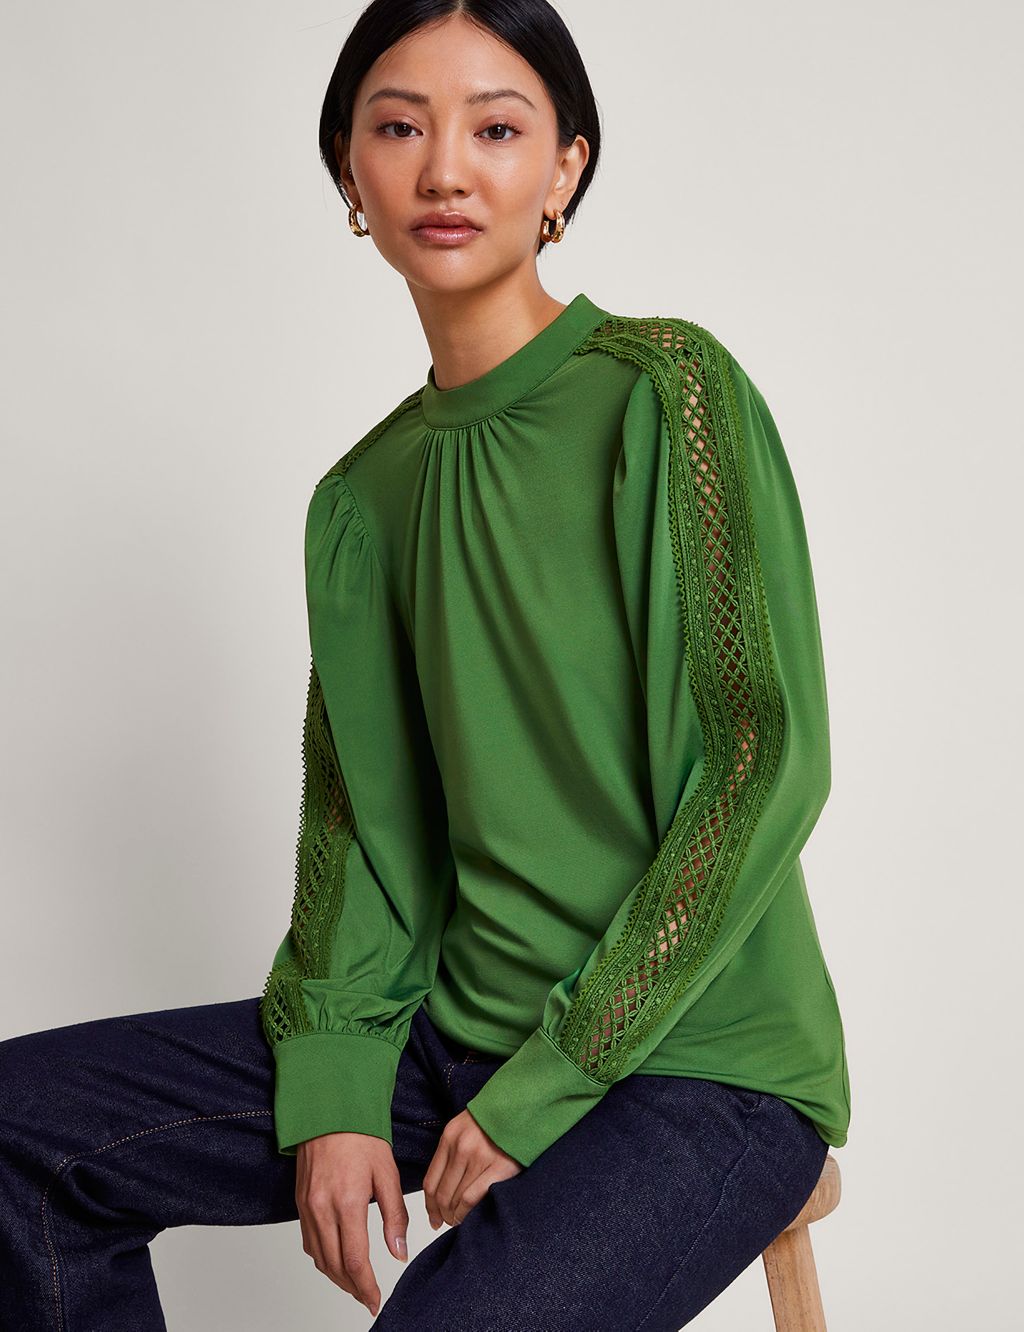 Deep front neck comfy blouse with keyhole back, Buy Mens & Kids Innerwear